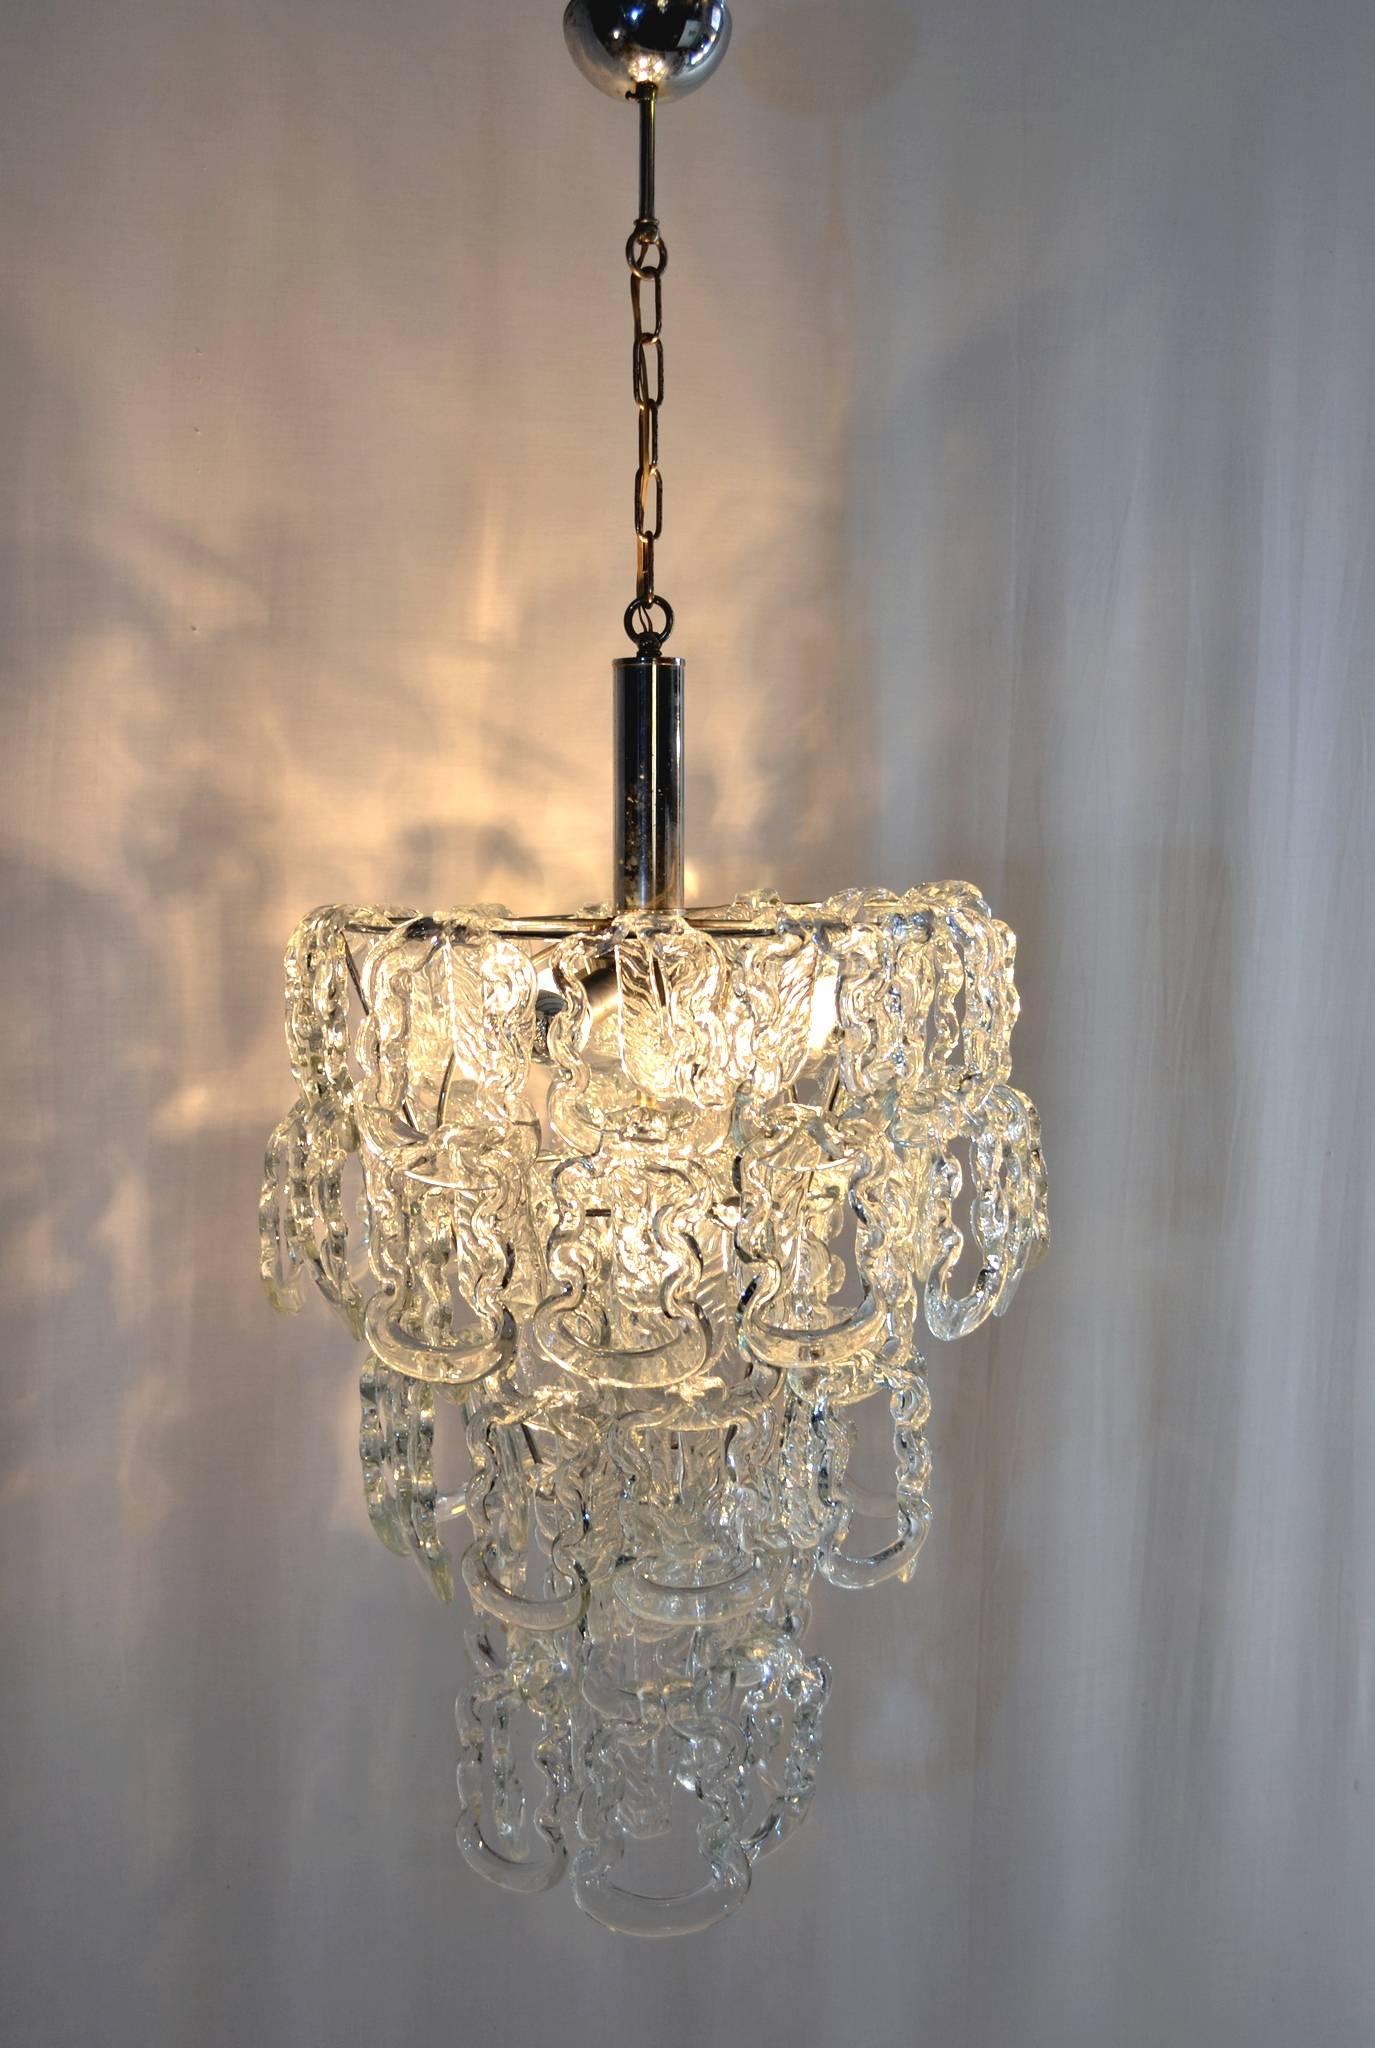 An original three tiered chandelier by Angelo Mangiarotti for Vistosi with Murano glass hanging from a chrome structure. The glass pieces can be hung a bit differently creating different heights for the chandelier. The height in this manner of the